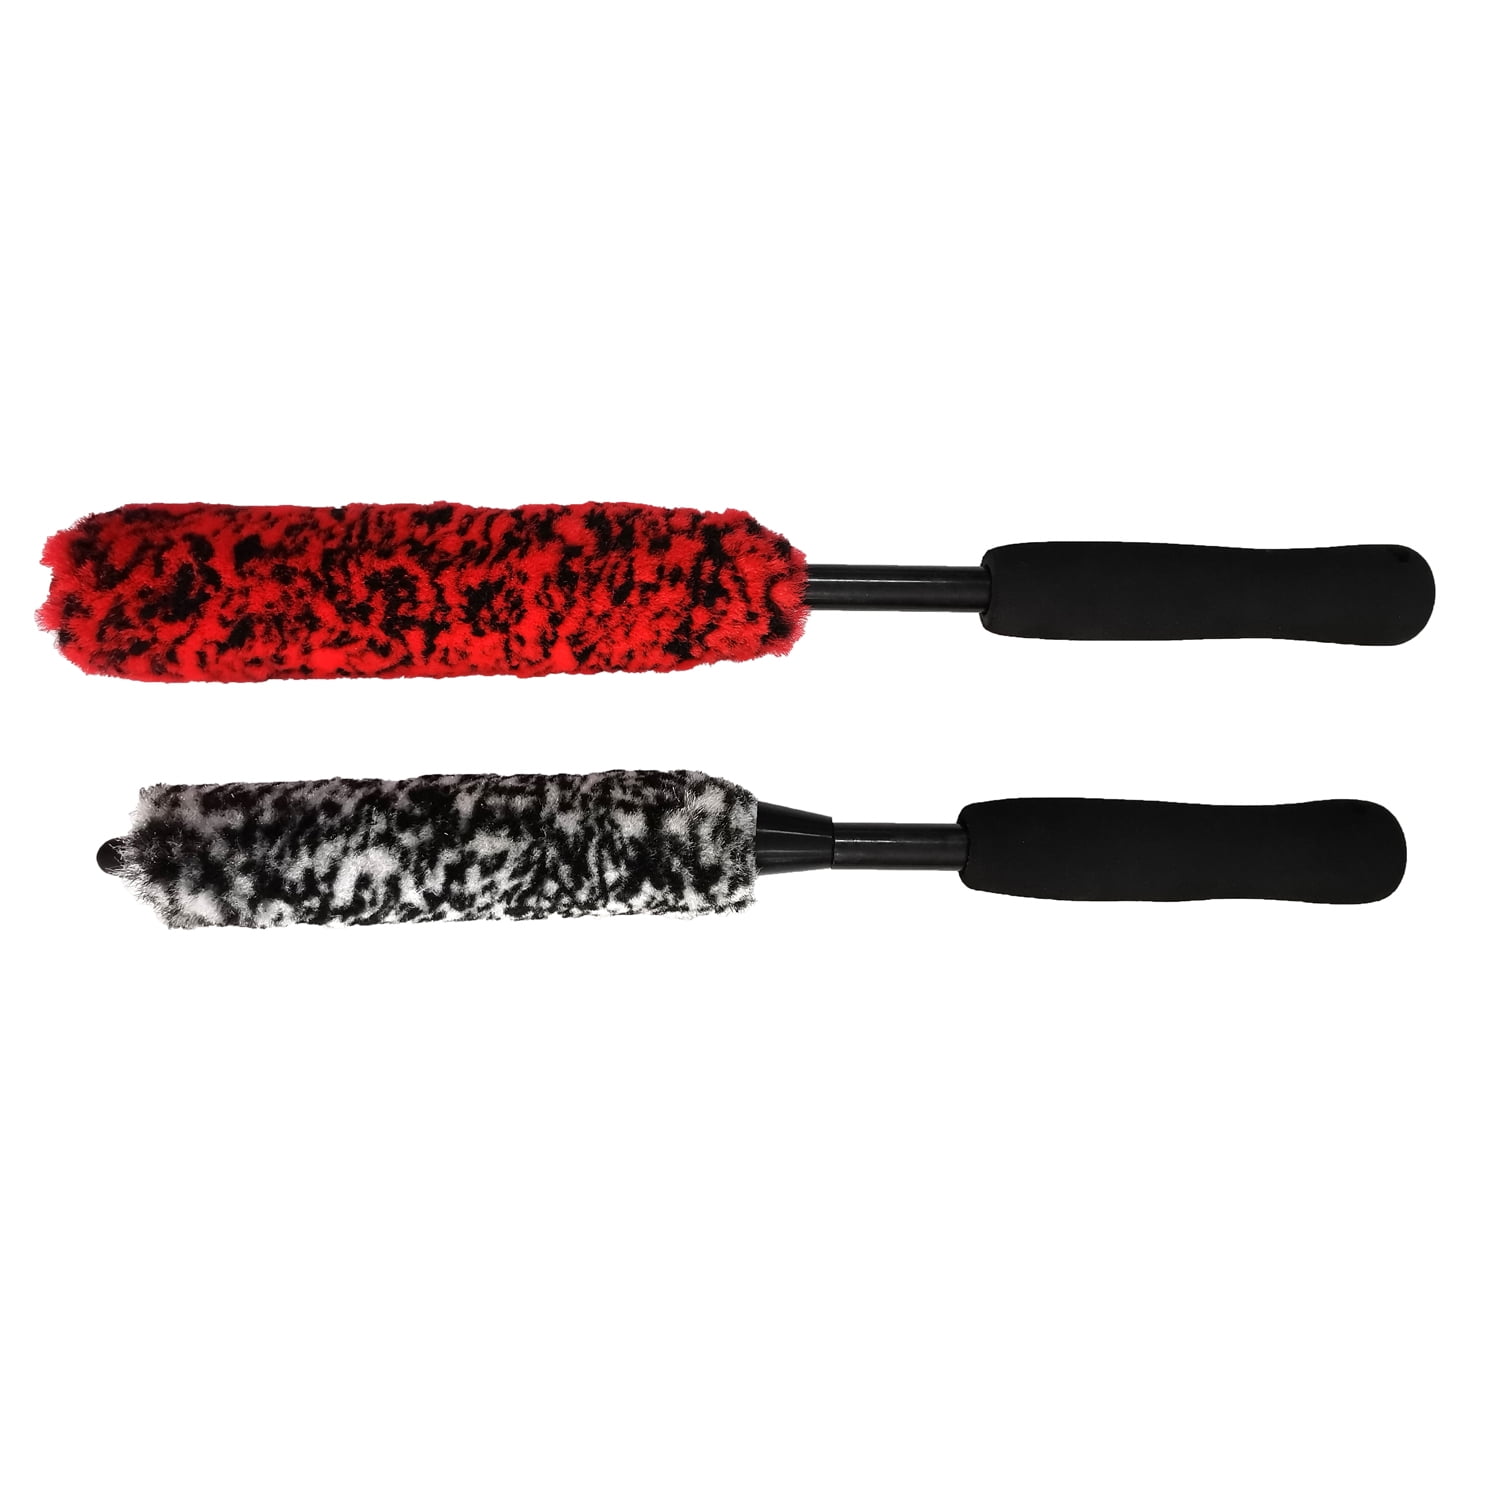 Auto Drive Brand 2 Pack Wooly Material Wheel Brush for Car Cleaning (Red & Black)